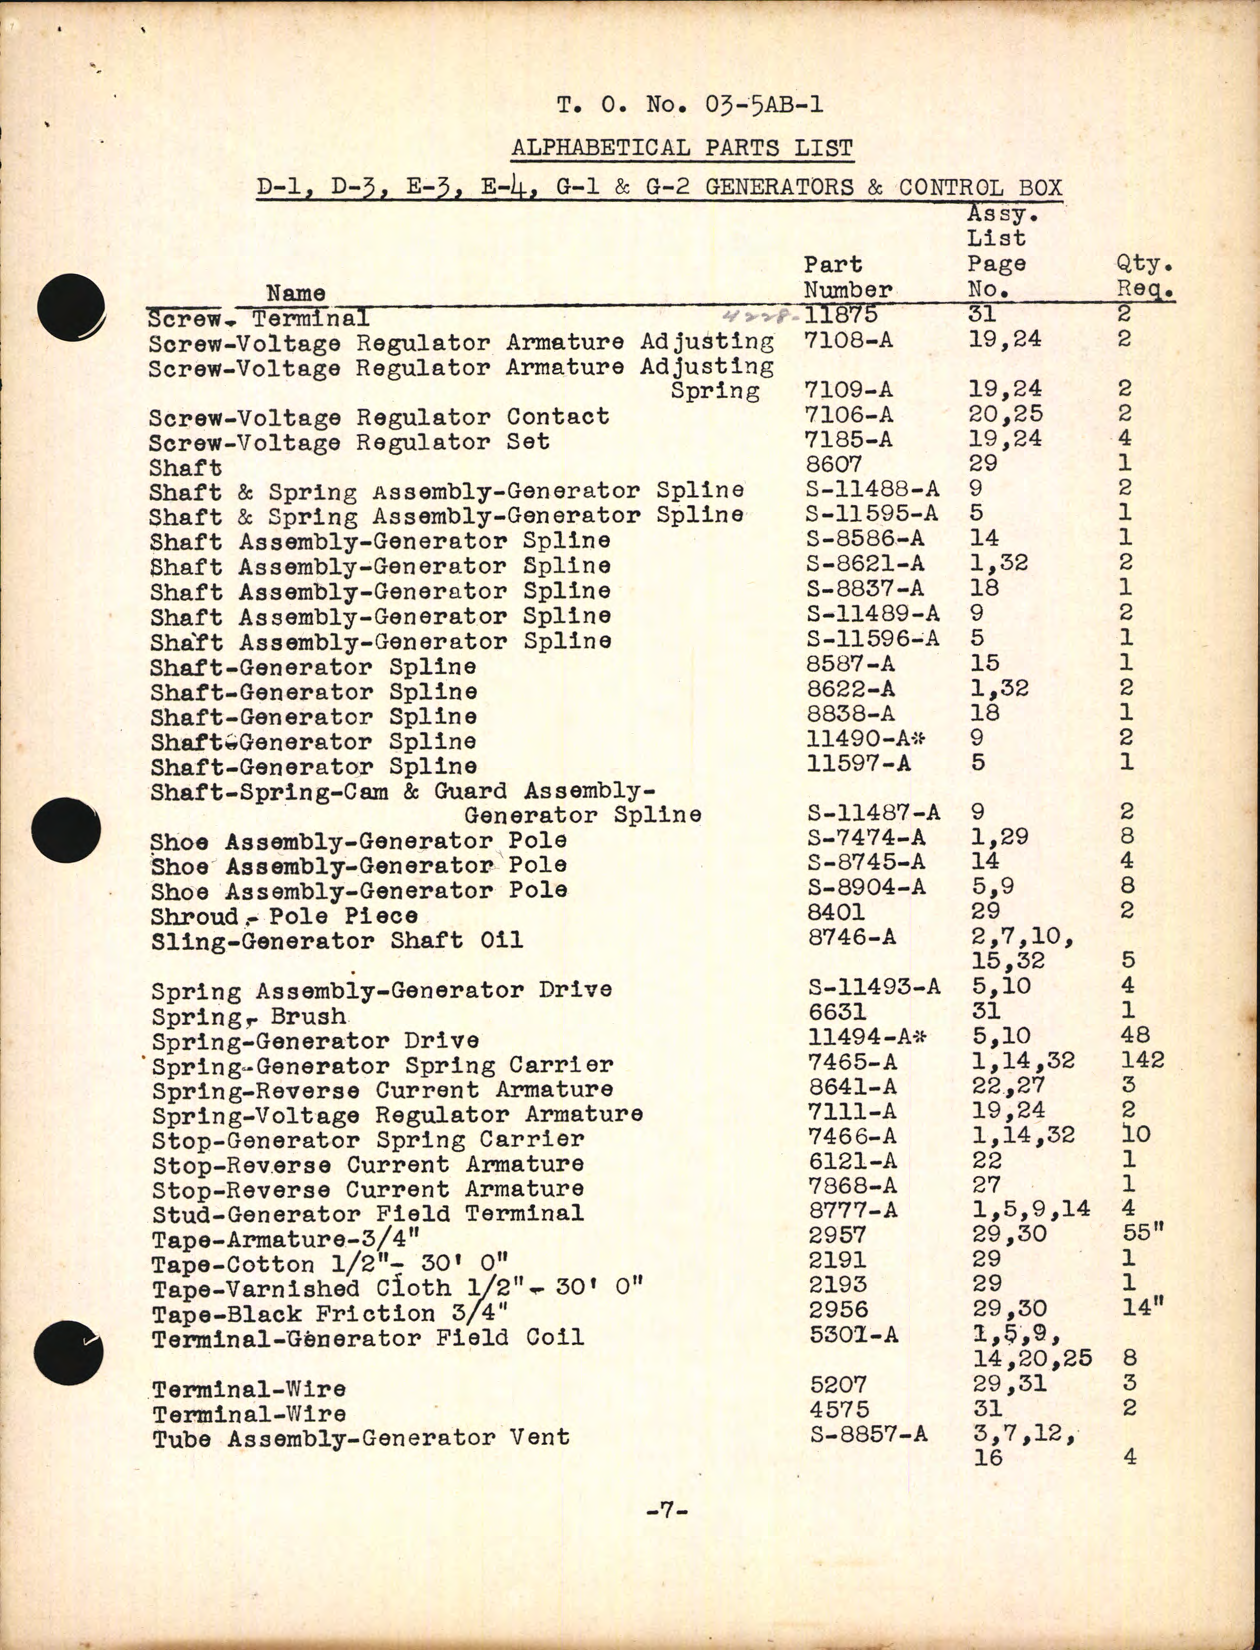 Sample page 7 from AirCorps Library document: Alphabetical Parts List for D-1, D-3, E-3, G-1, and G-2 Generators and Control Box